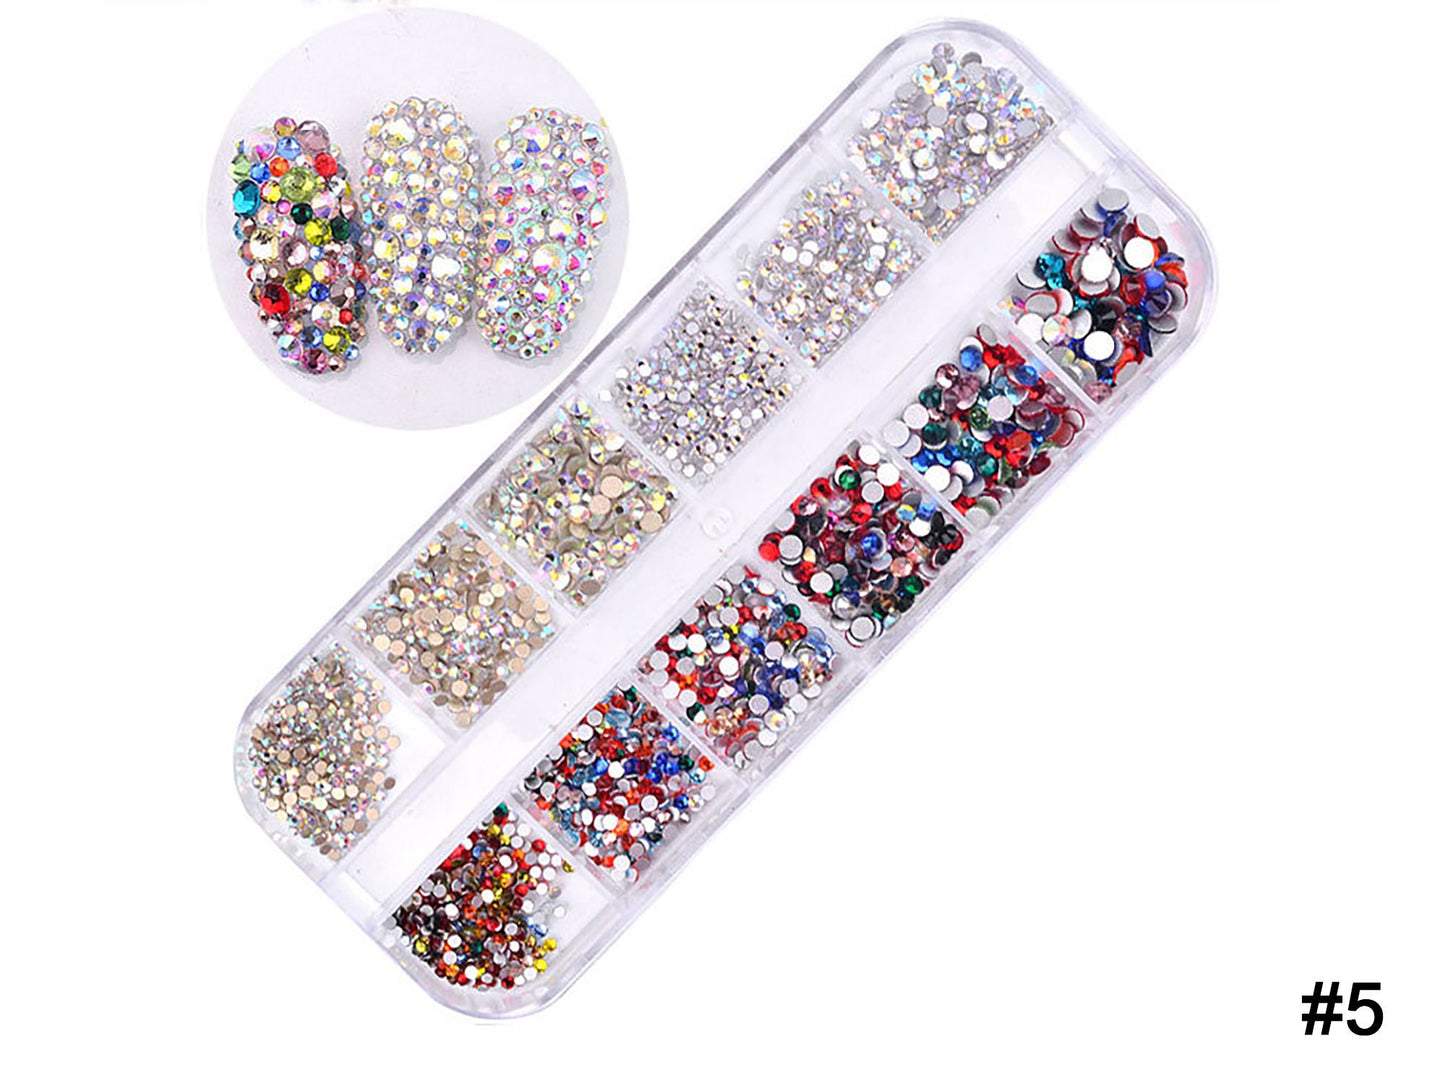 12 grids Rhinestones for Nails Art Decorations / Flat Back Mixed multi colored AB Crystal nail art Decal/ 3D Gemstones Crafts & Manicure